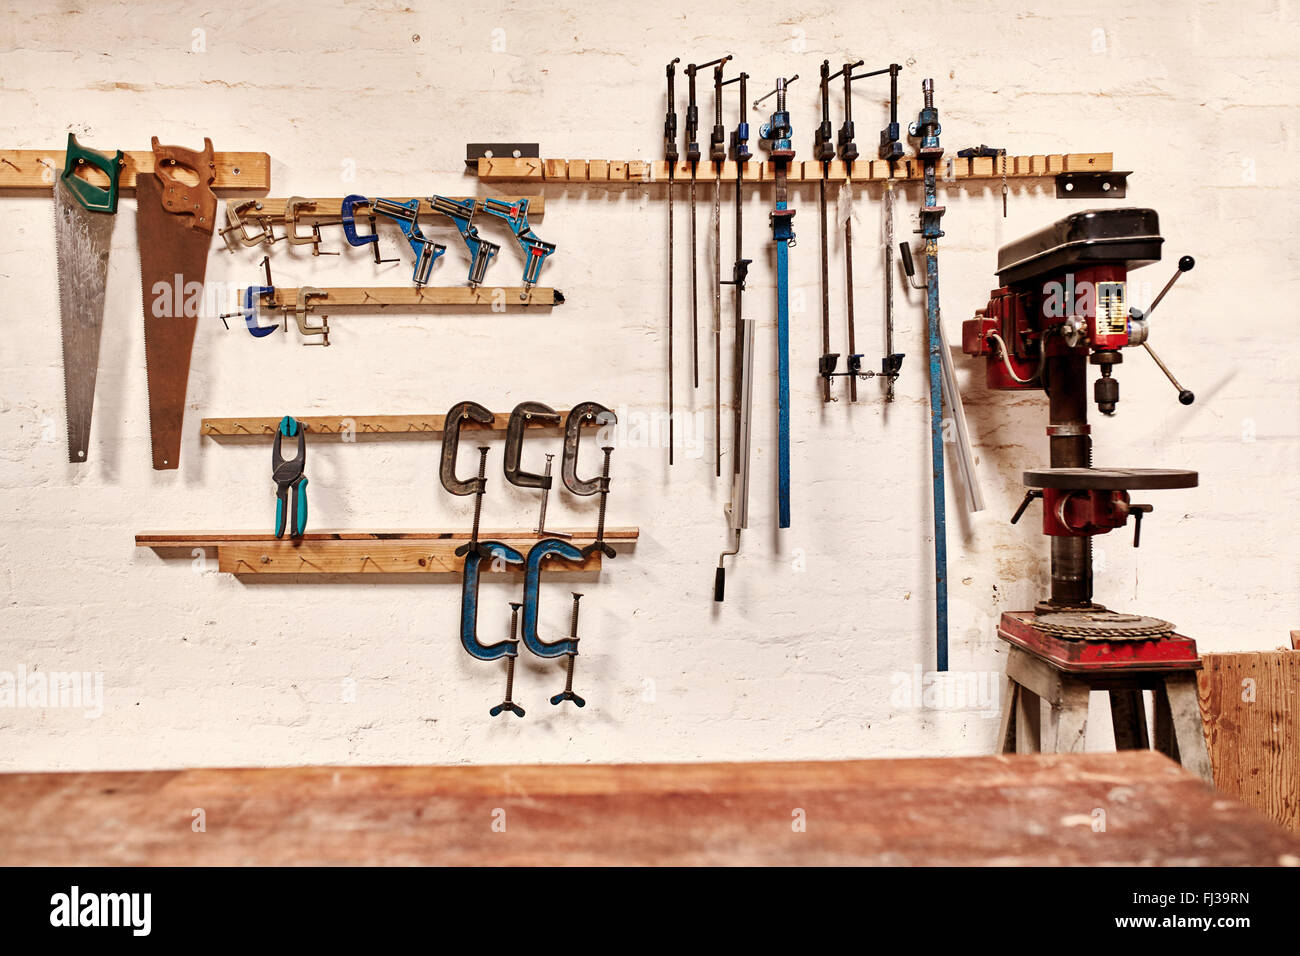 Workshop wall with tools in rows alongside a drill press Stock Photo